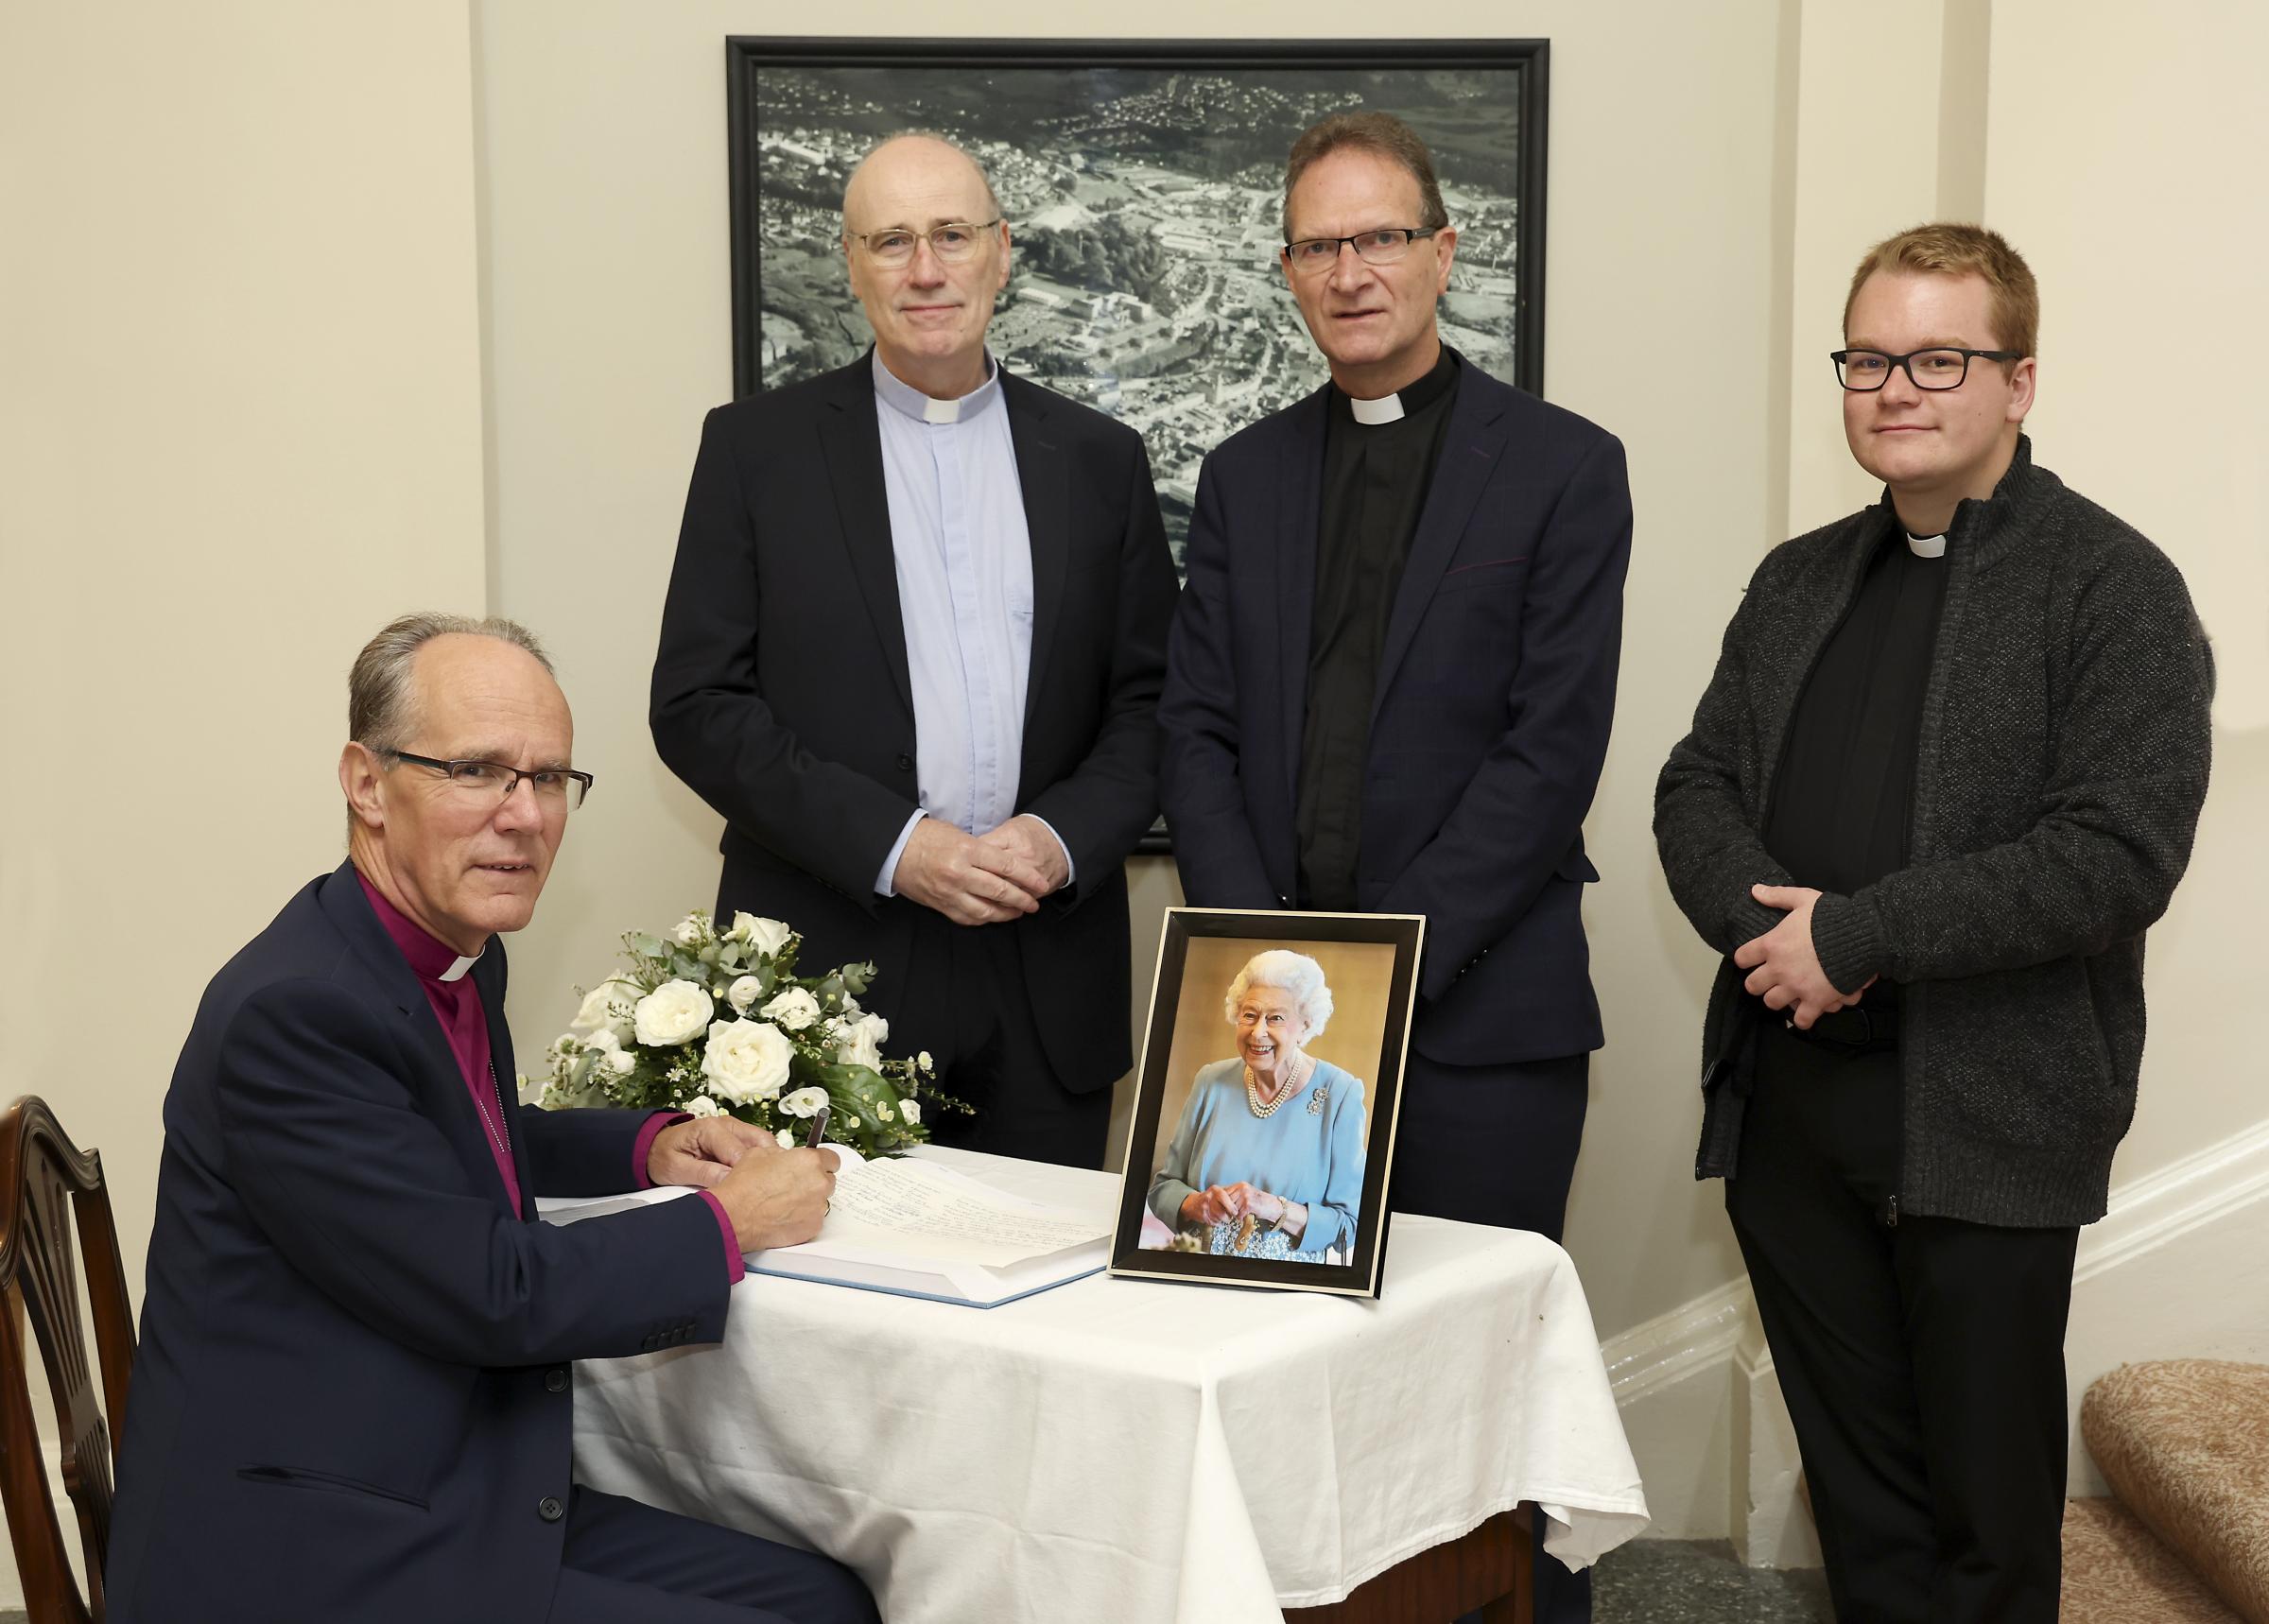 The Bishop of Clogher, the Right Revd Dr Ian Ellis, signs the book of condolences in memory of Her Majesty, Queen Elizabeth II. Also included are Right Rev. Monsignor, Peter OReilly, The Very Rev. Dean, Kenneth Hall and Rev. Chris West, Curate.